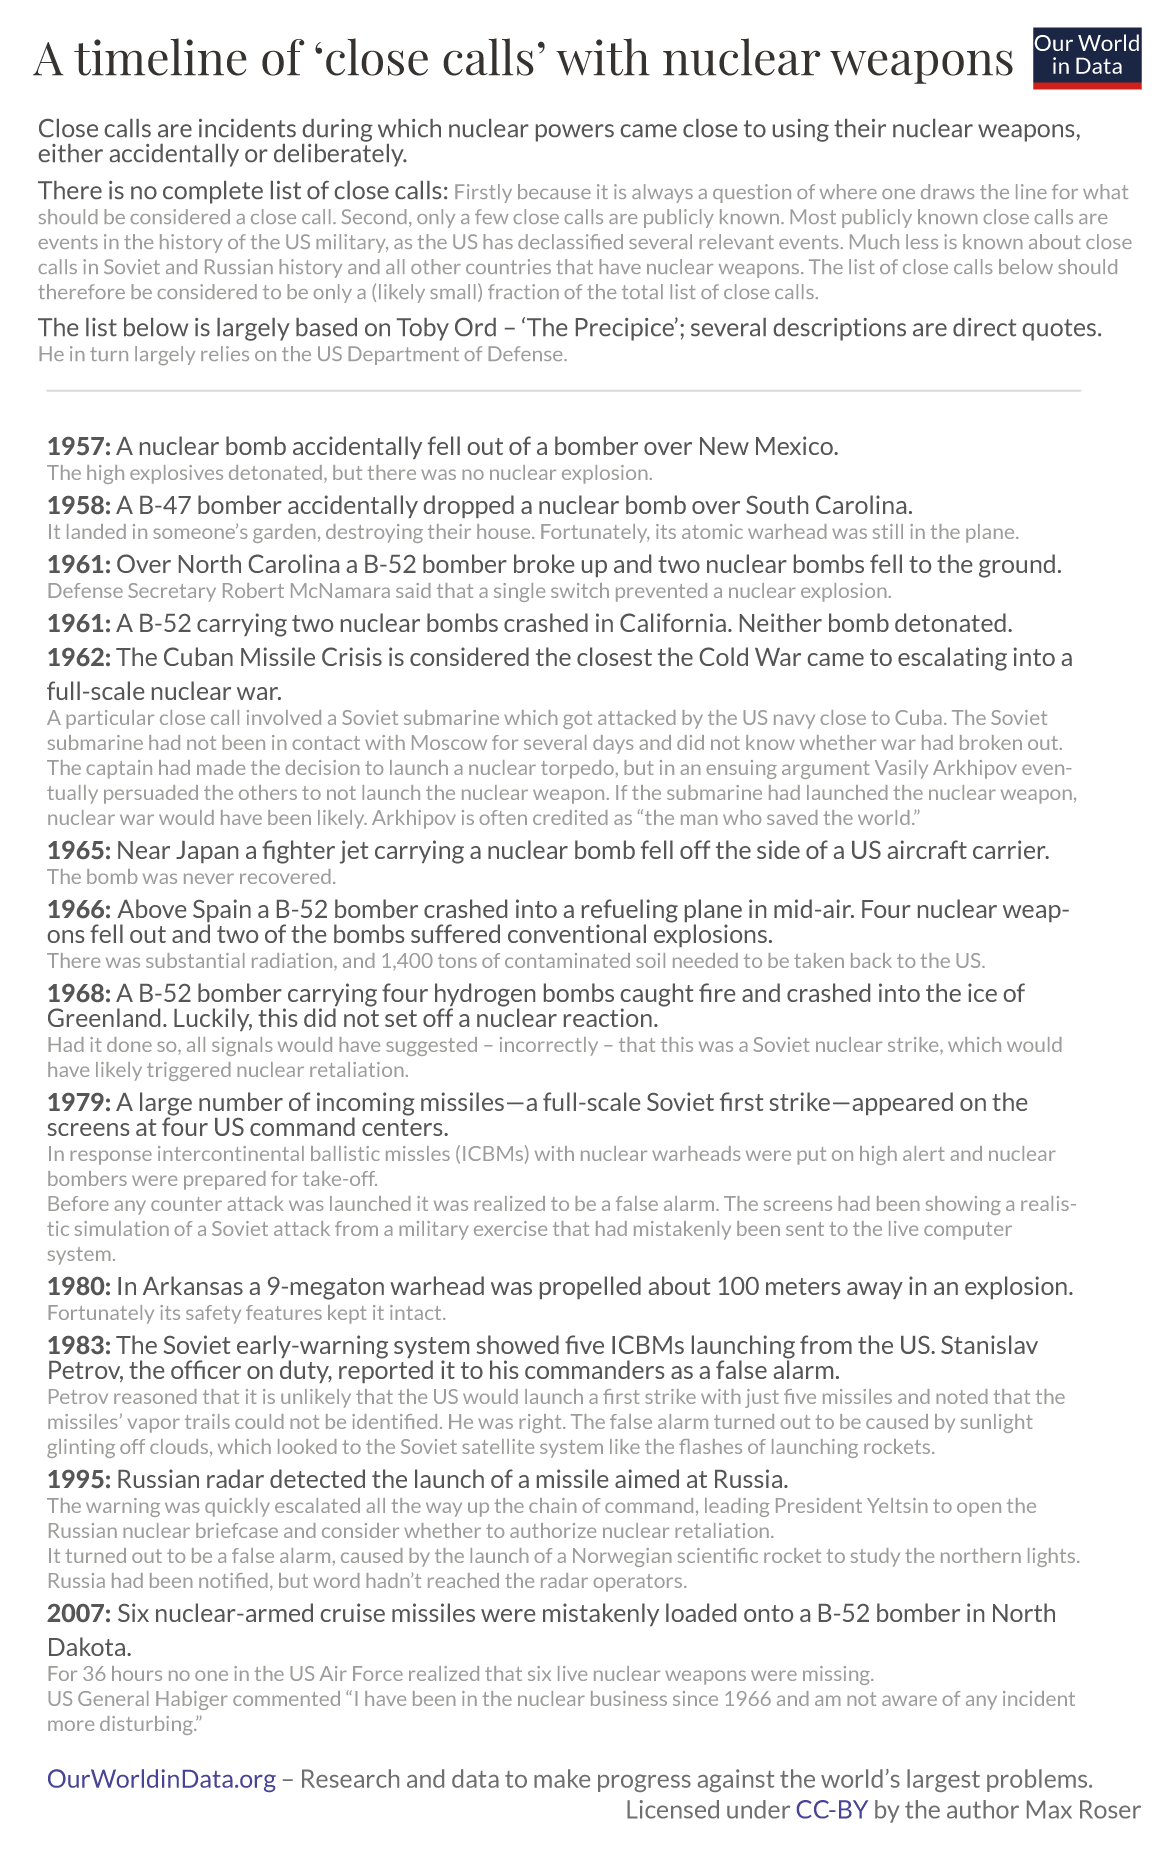 Close calls nuclear weapons timeline 1